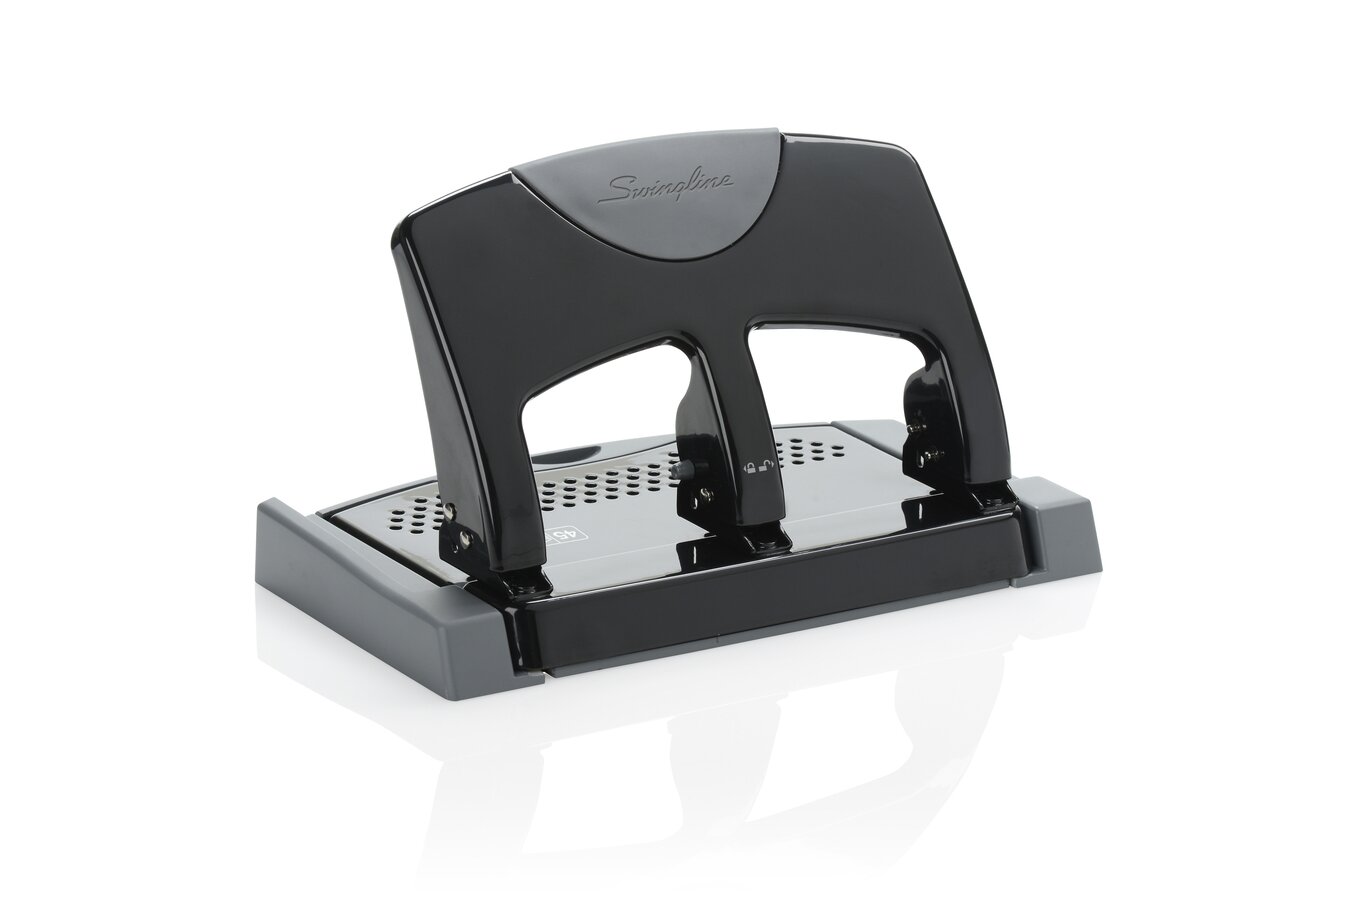 Swingline 3 Hole Punch, Desktop Puncher for Binder, 20 Sheet Punch  Capacity, SmartTouch, Black/Silver (74133)